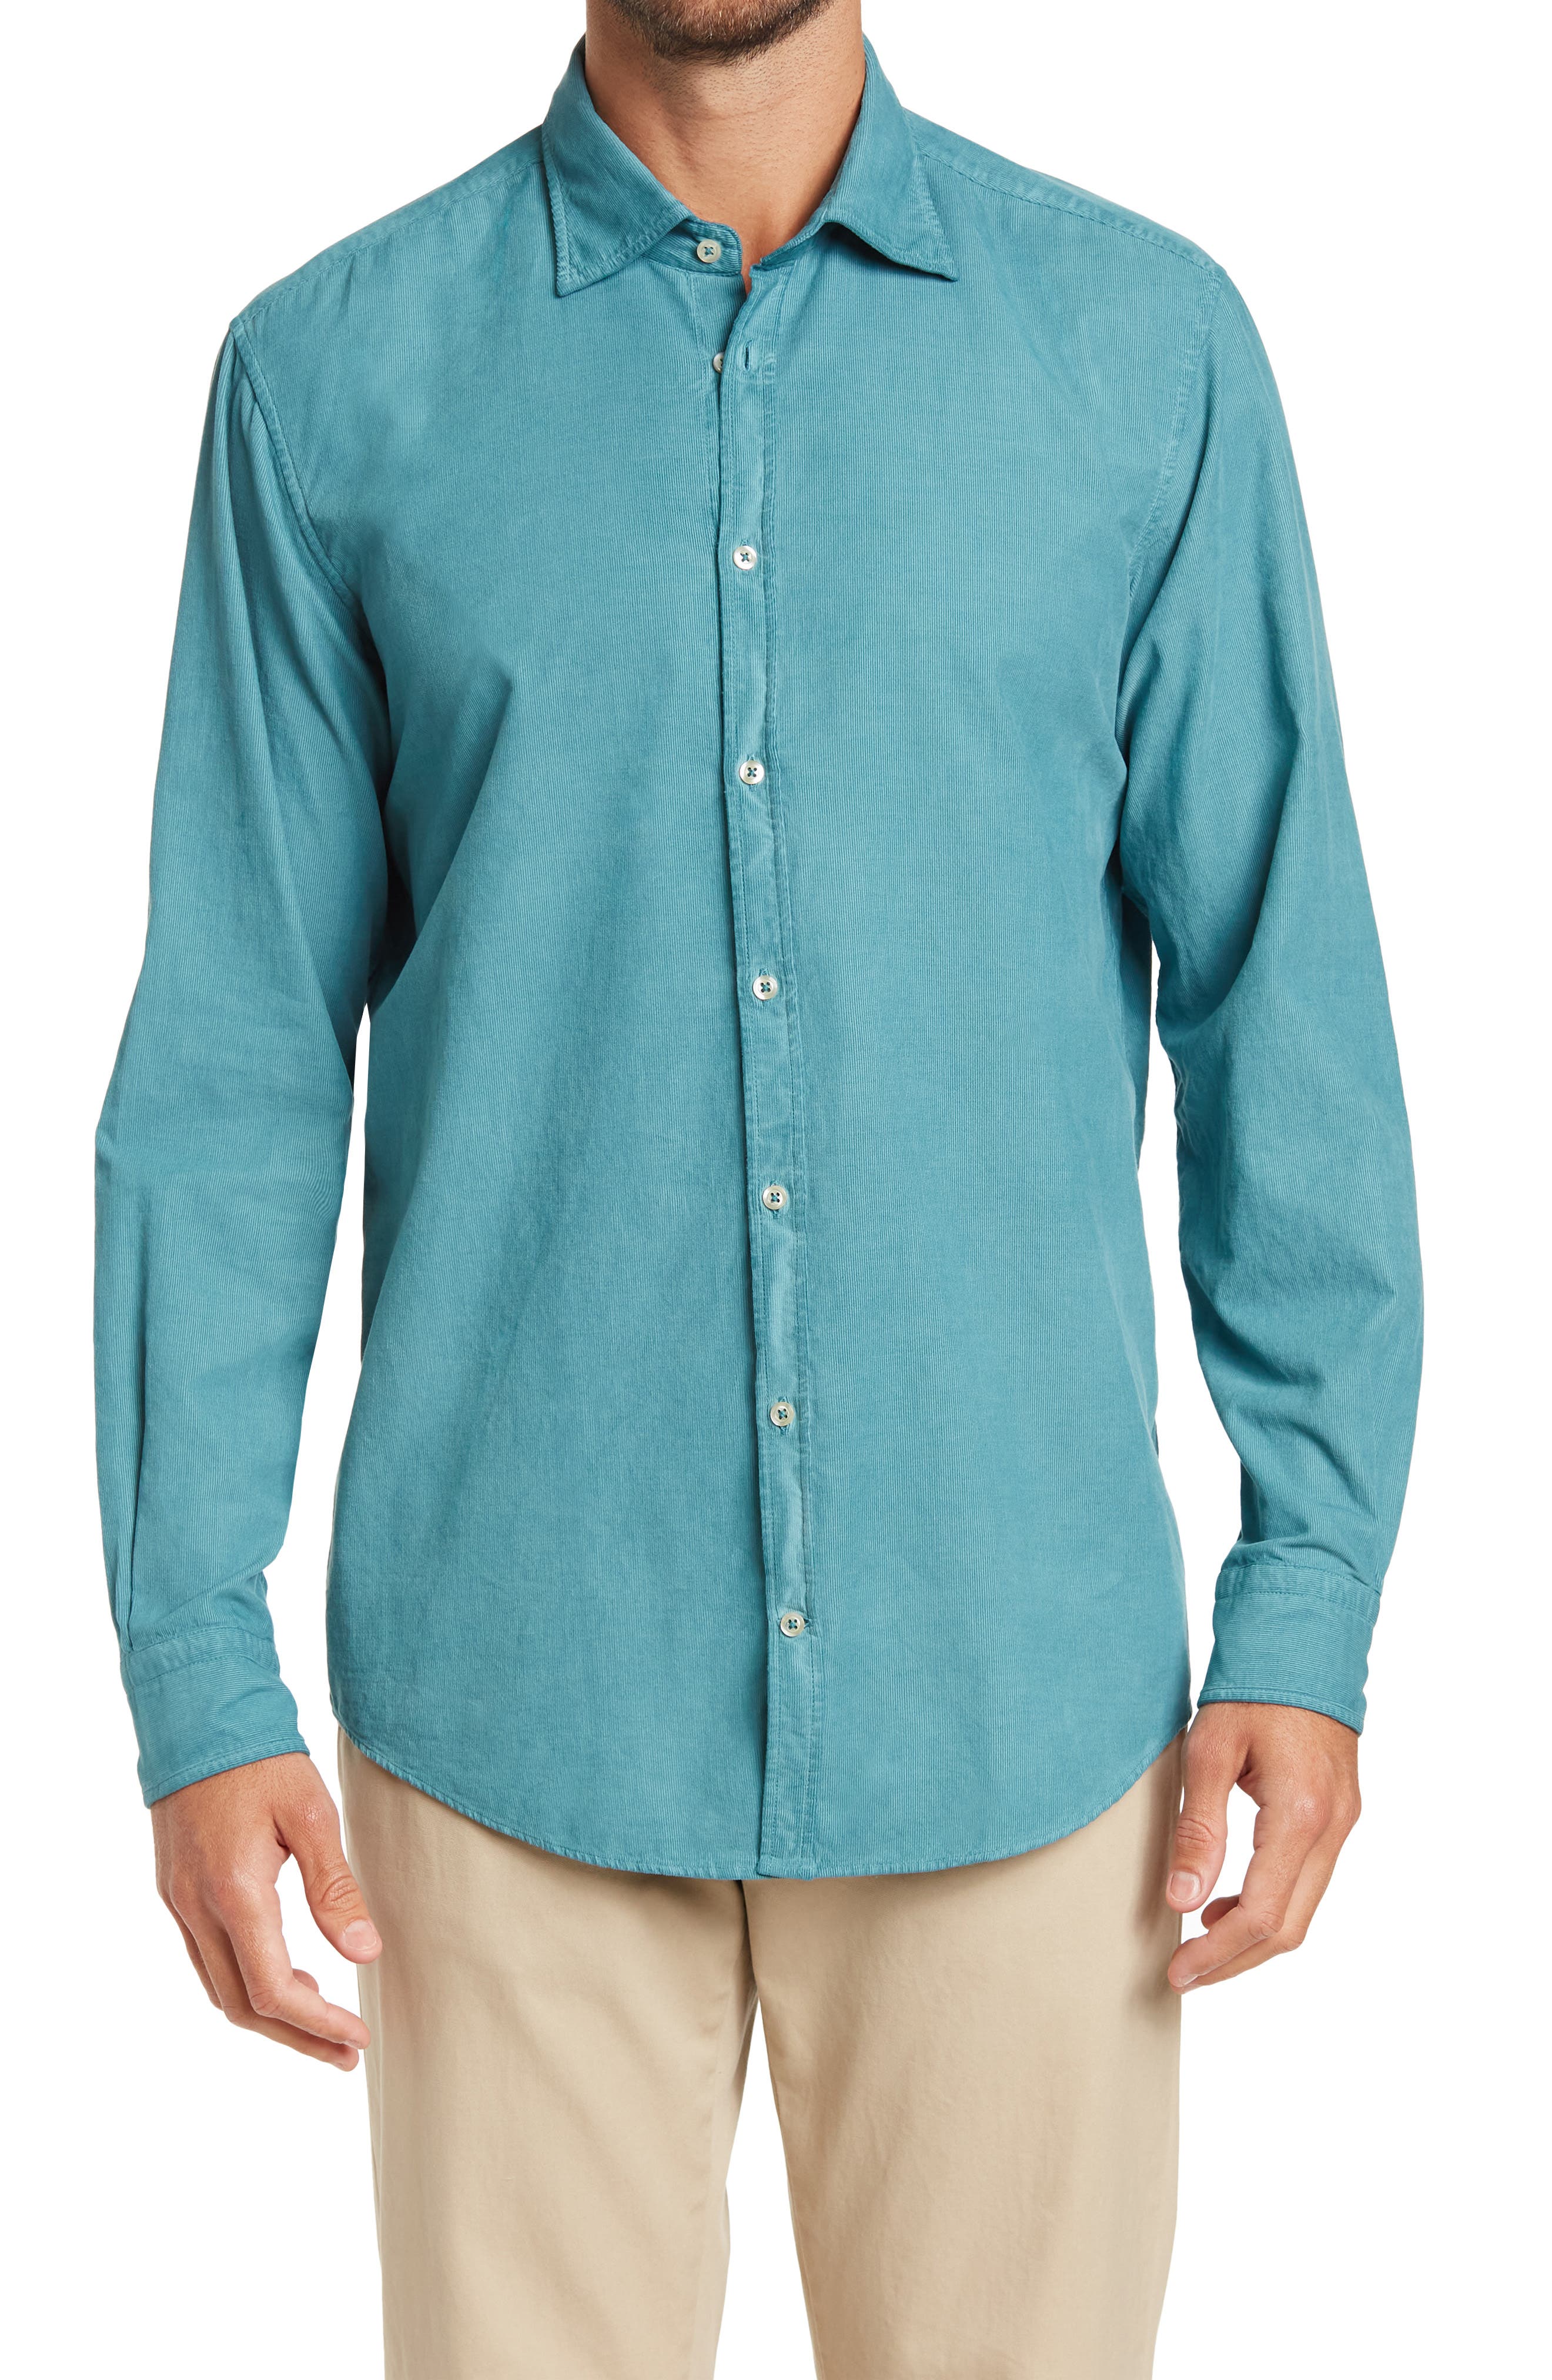 Nordstrom Clothing Shirts Watercolor Baby Corduroy Button-Up Shirt in Teal at Nordstrom 